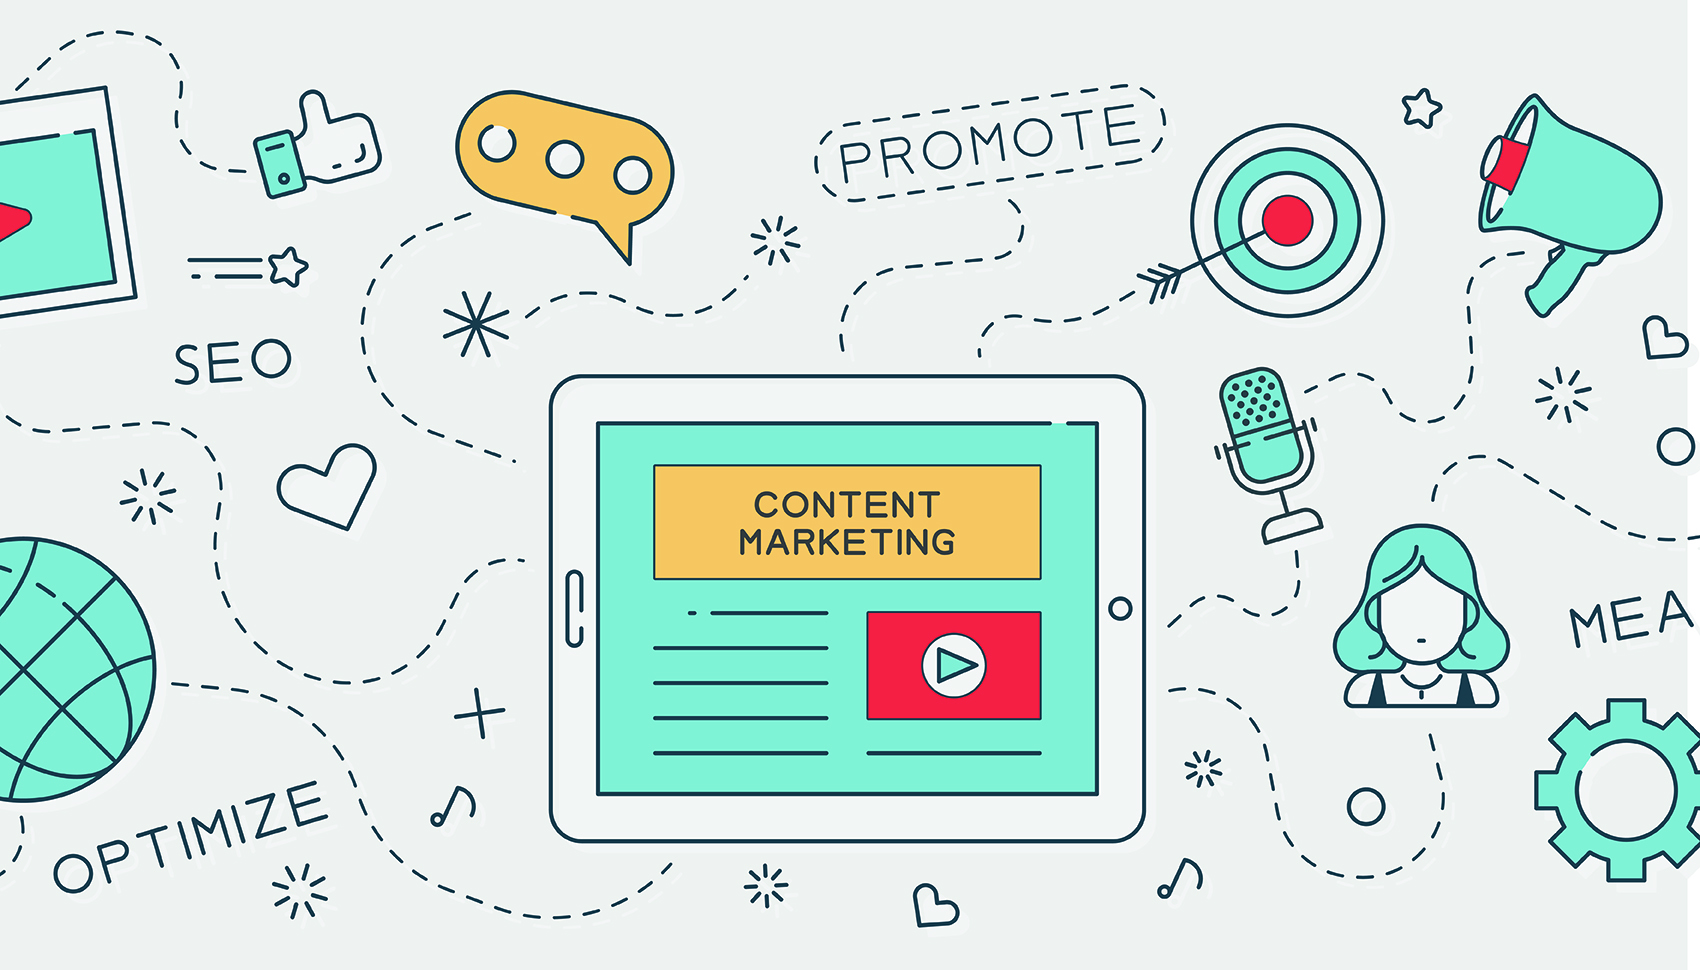 Start the journey to better Content Marketing in 2018